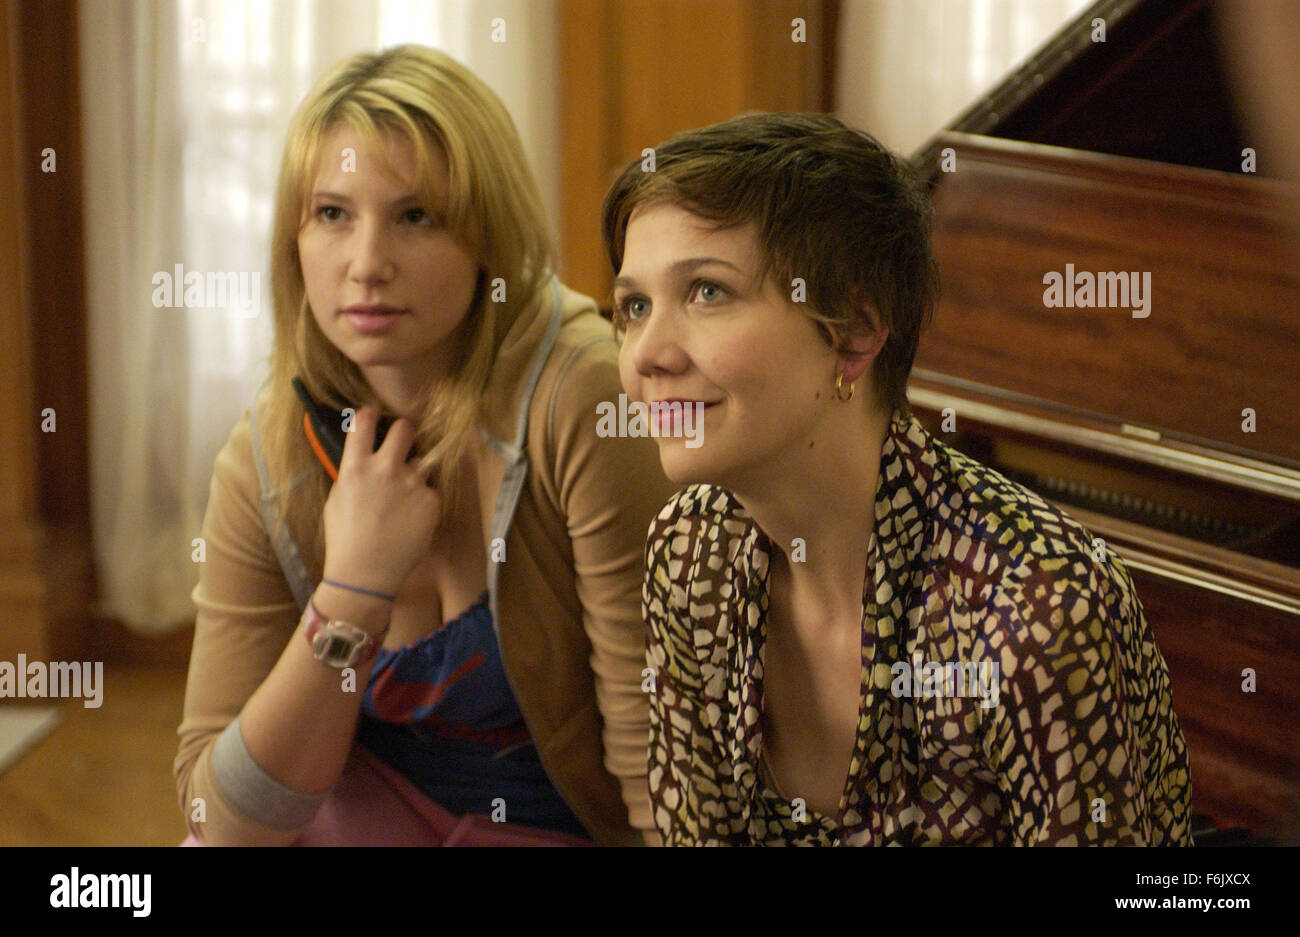 RELEASE DATE: April 22, 2005. MOVIE TITLE: The Great New Wonderful. STUDIO: Serenade Films. PLOT: The Great New Wonderful weaves five stories against the backdrop of an anxious and uncertain post-9-11 New York City. PICTURED: MAGGIE GYLLENHAAL (right) stars as Emme and ARI GRAYNOR as Lisa. Stock Photo